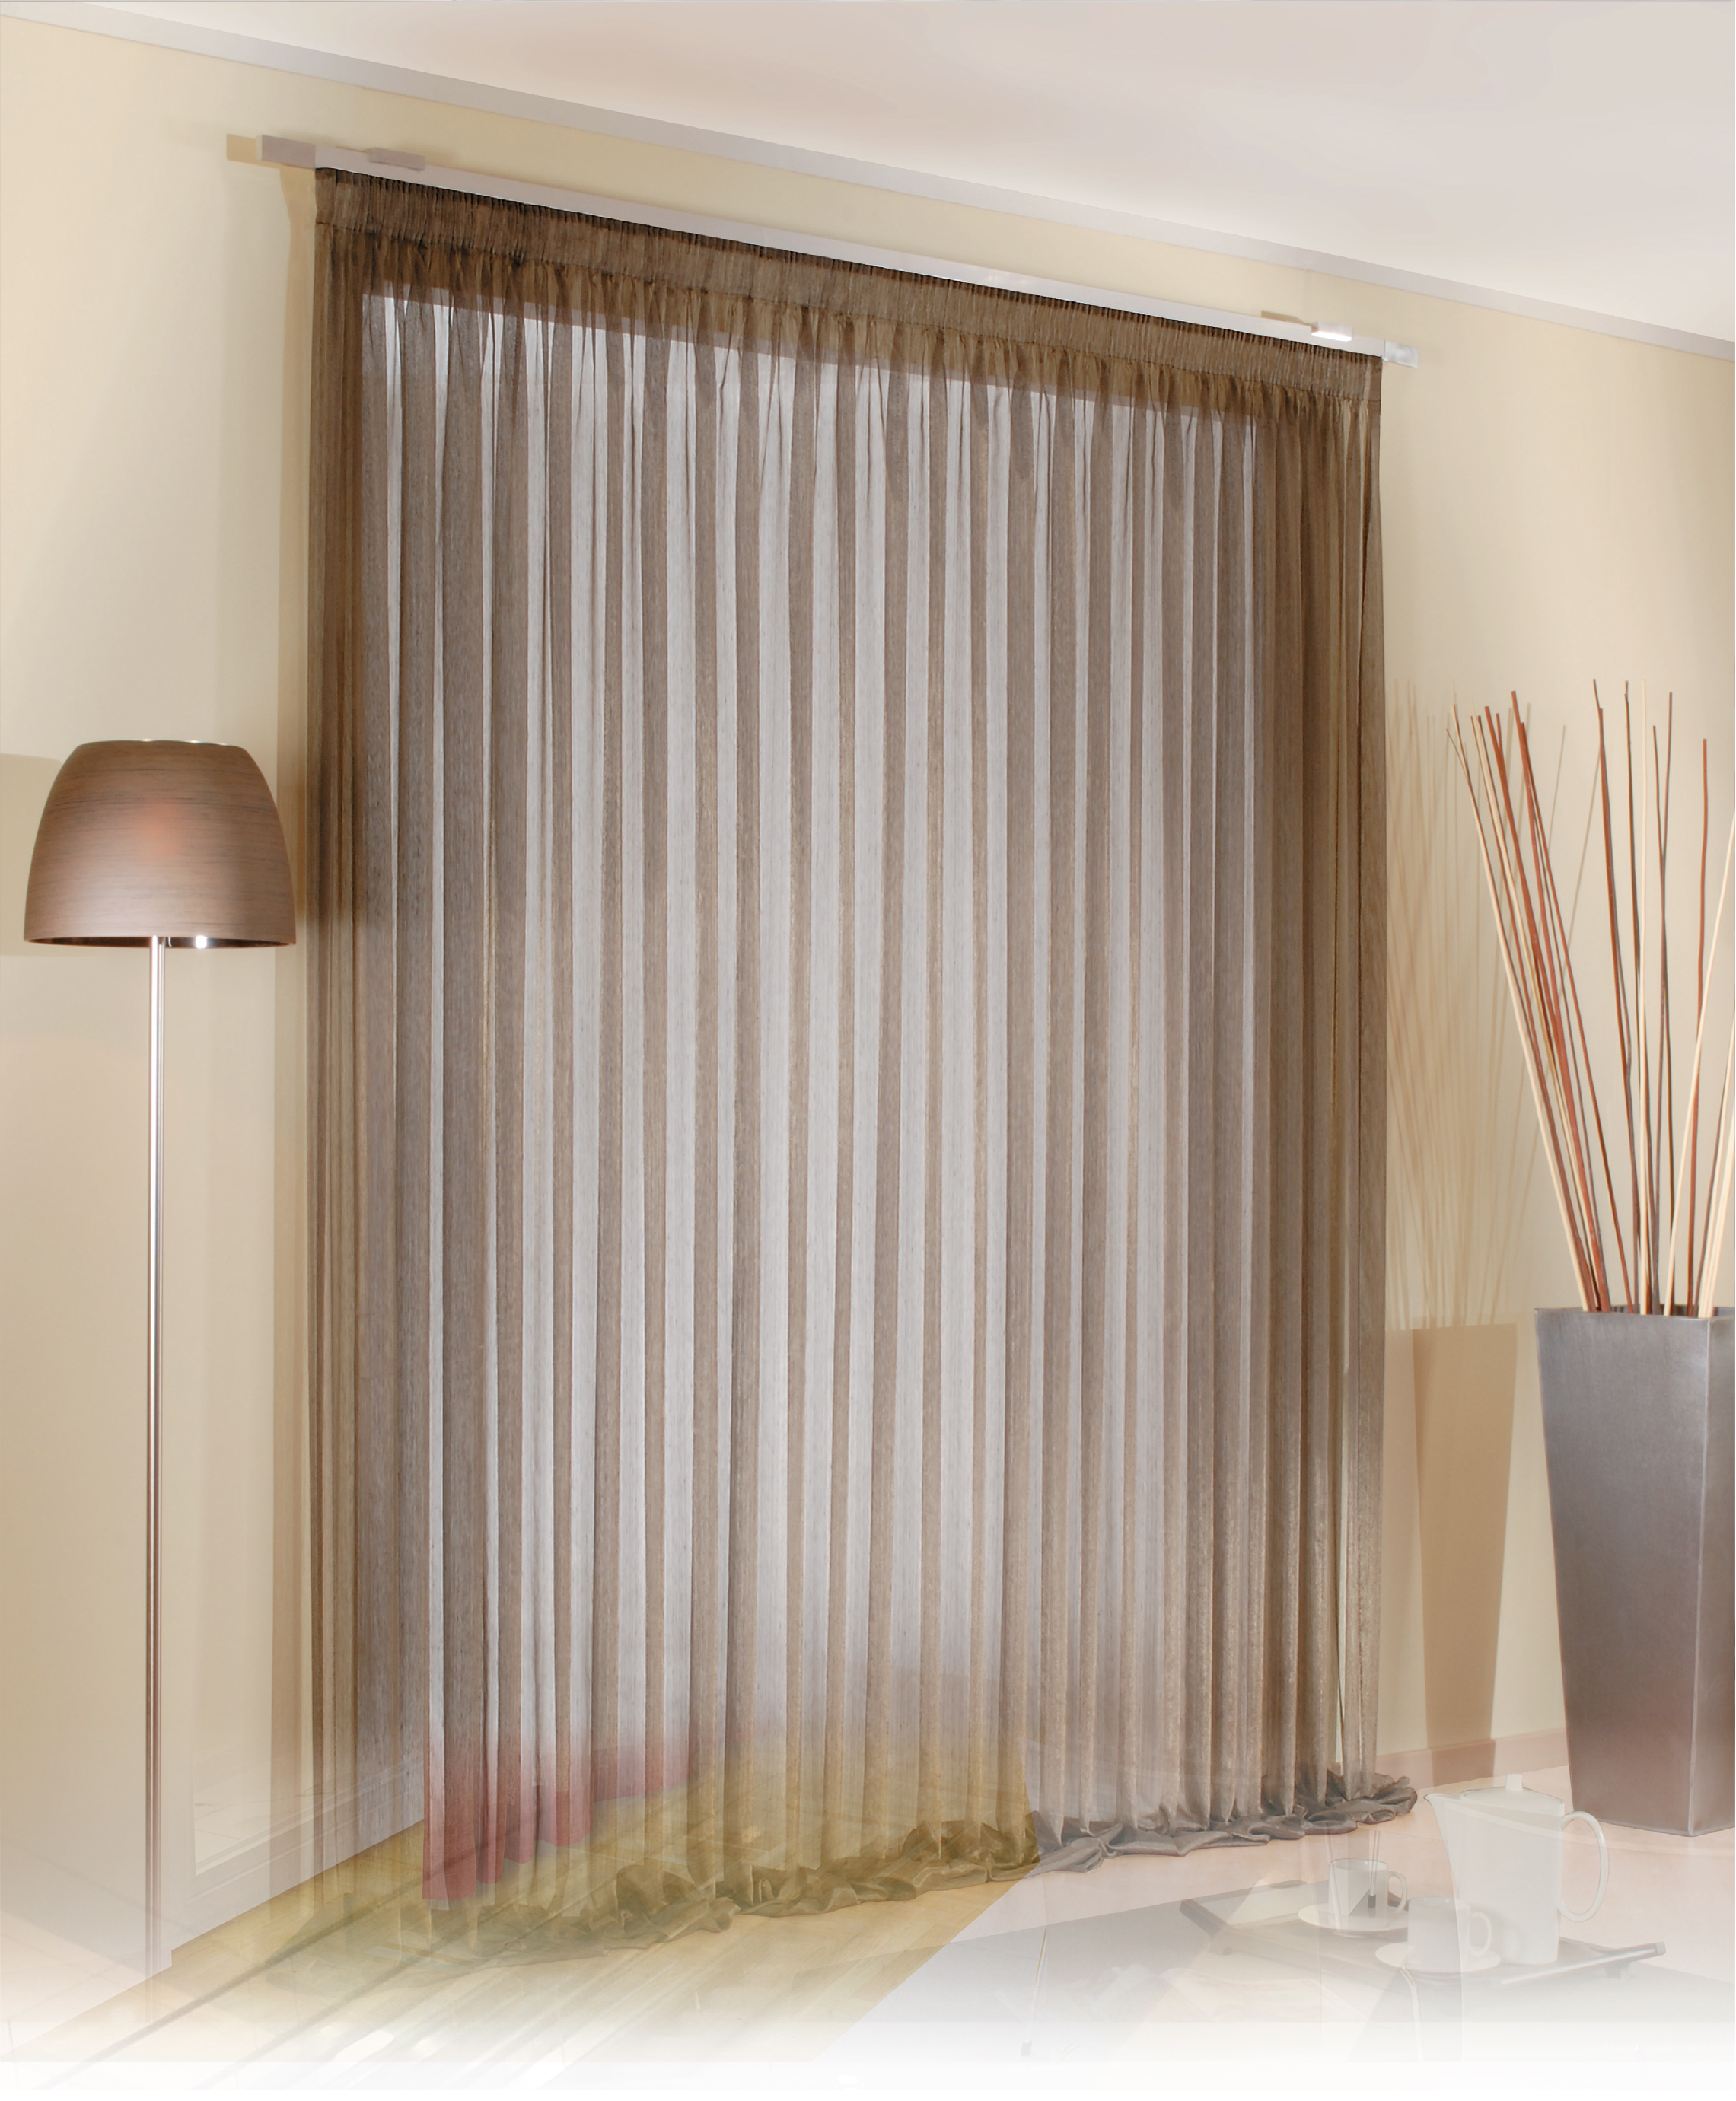 1.Style of your electric drape or motorized curtain